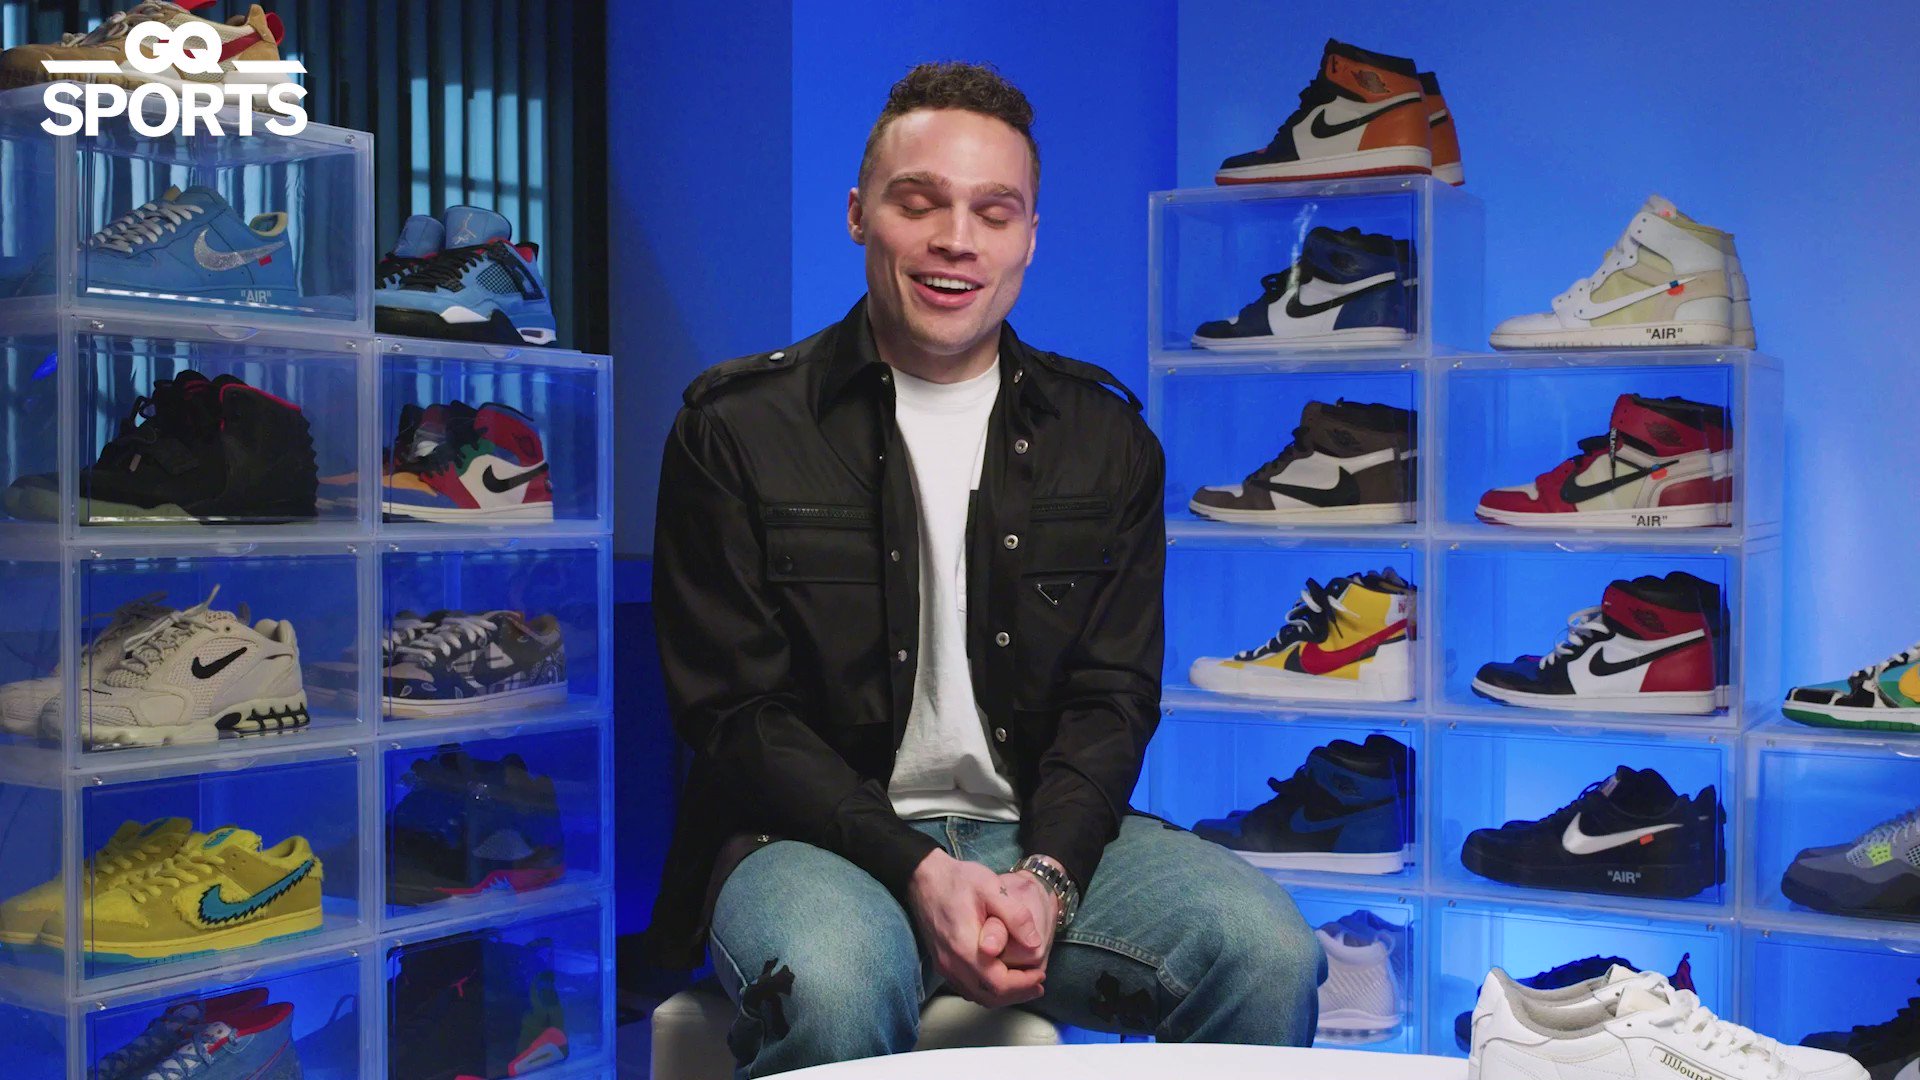 Watch NHL's Max Domi Shows Off His Sneaker Collection, My Life In Sneakers, My Life in Sneakers